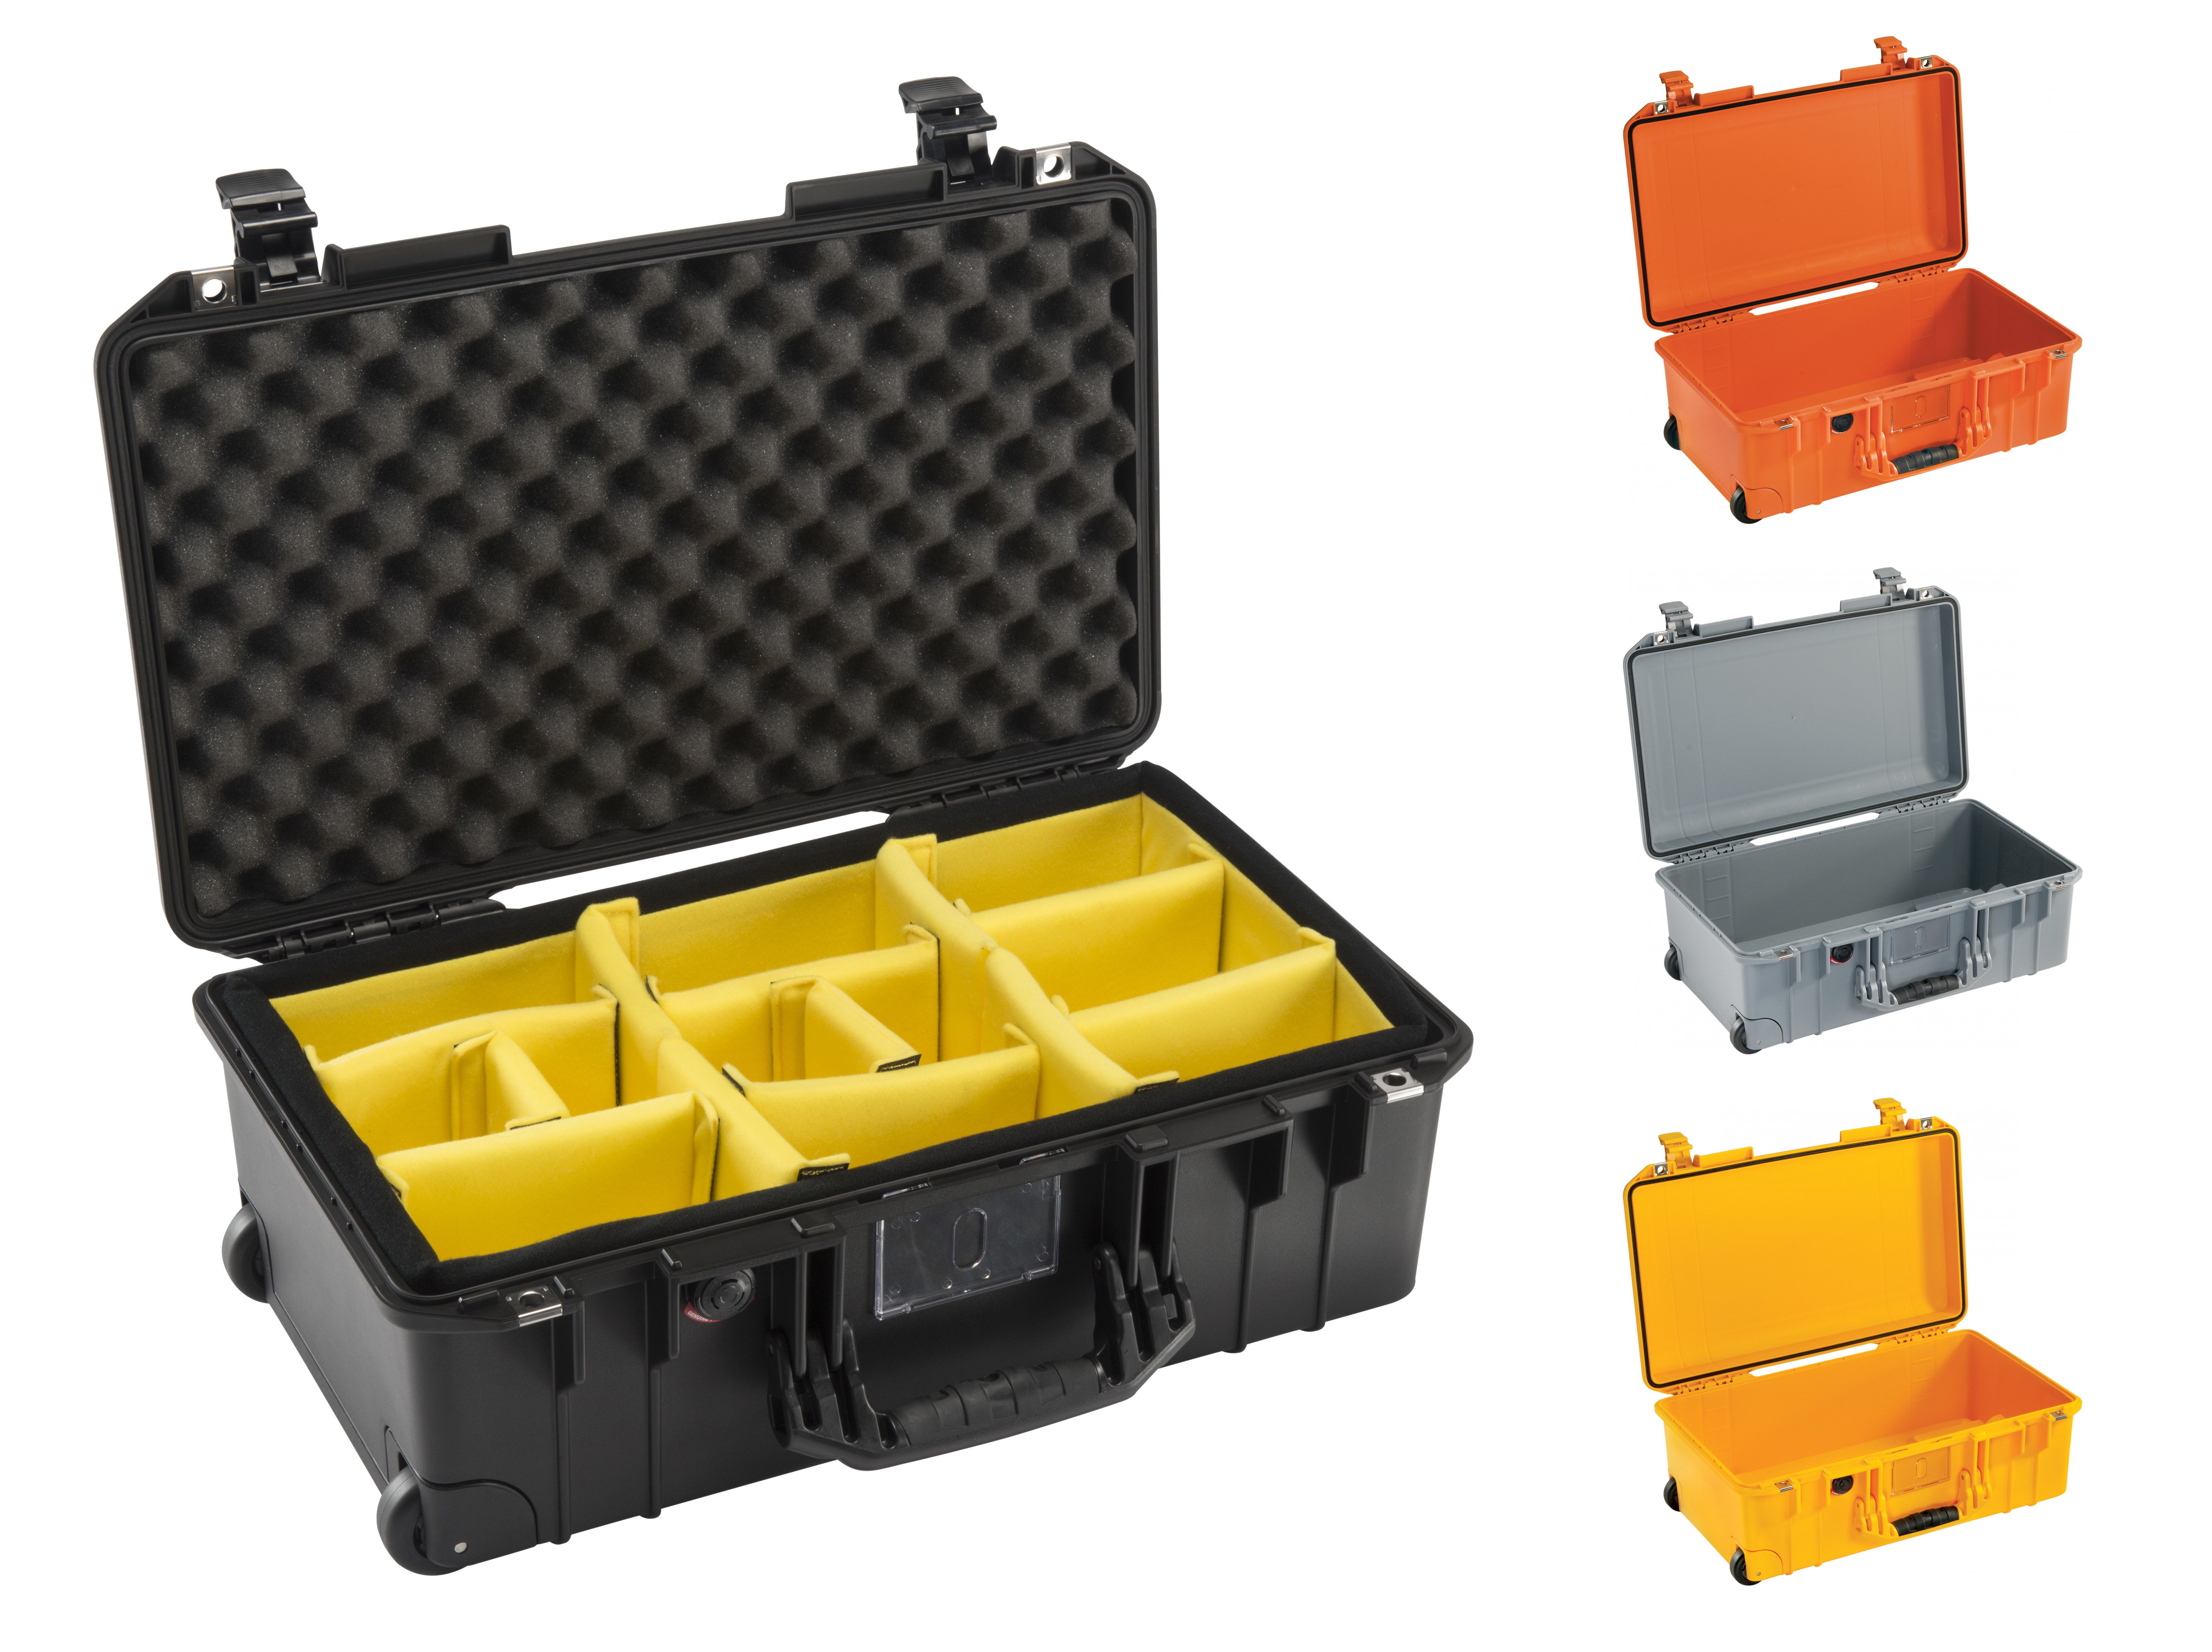 Pelican 1535 Air Protector Case Up To 24 55 Off 5 Star Rating W Free Shipping